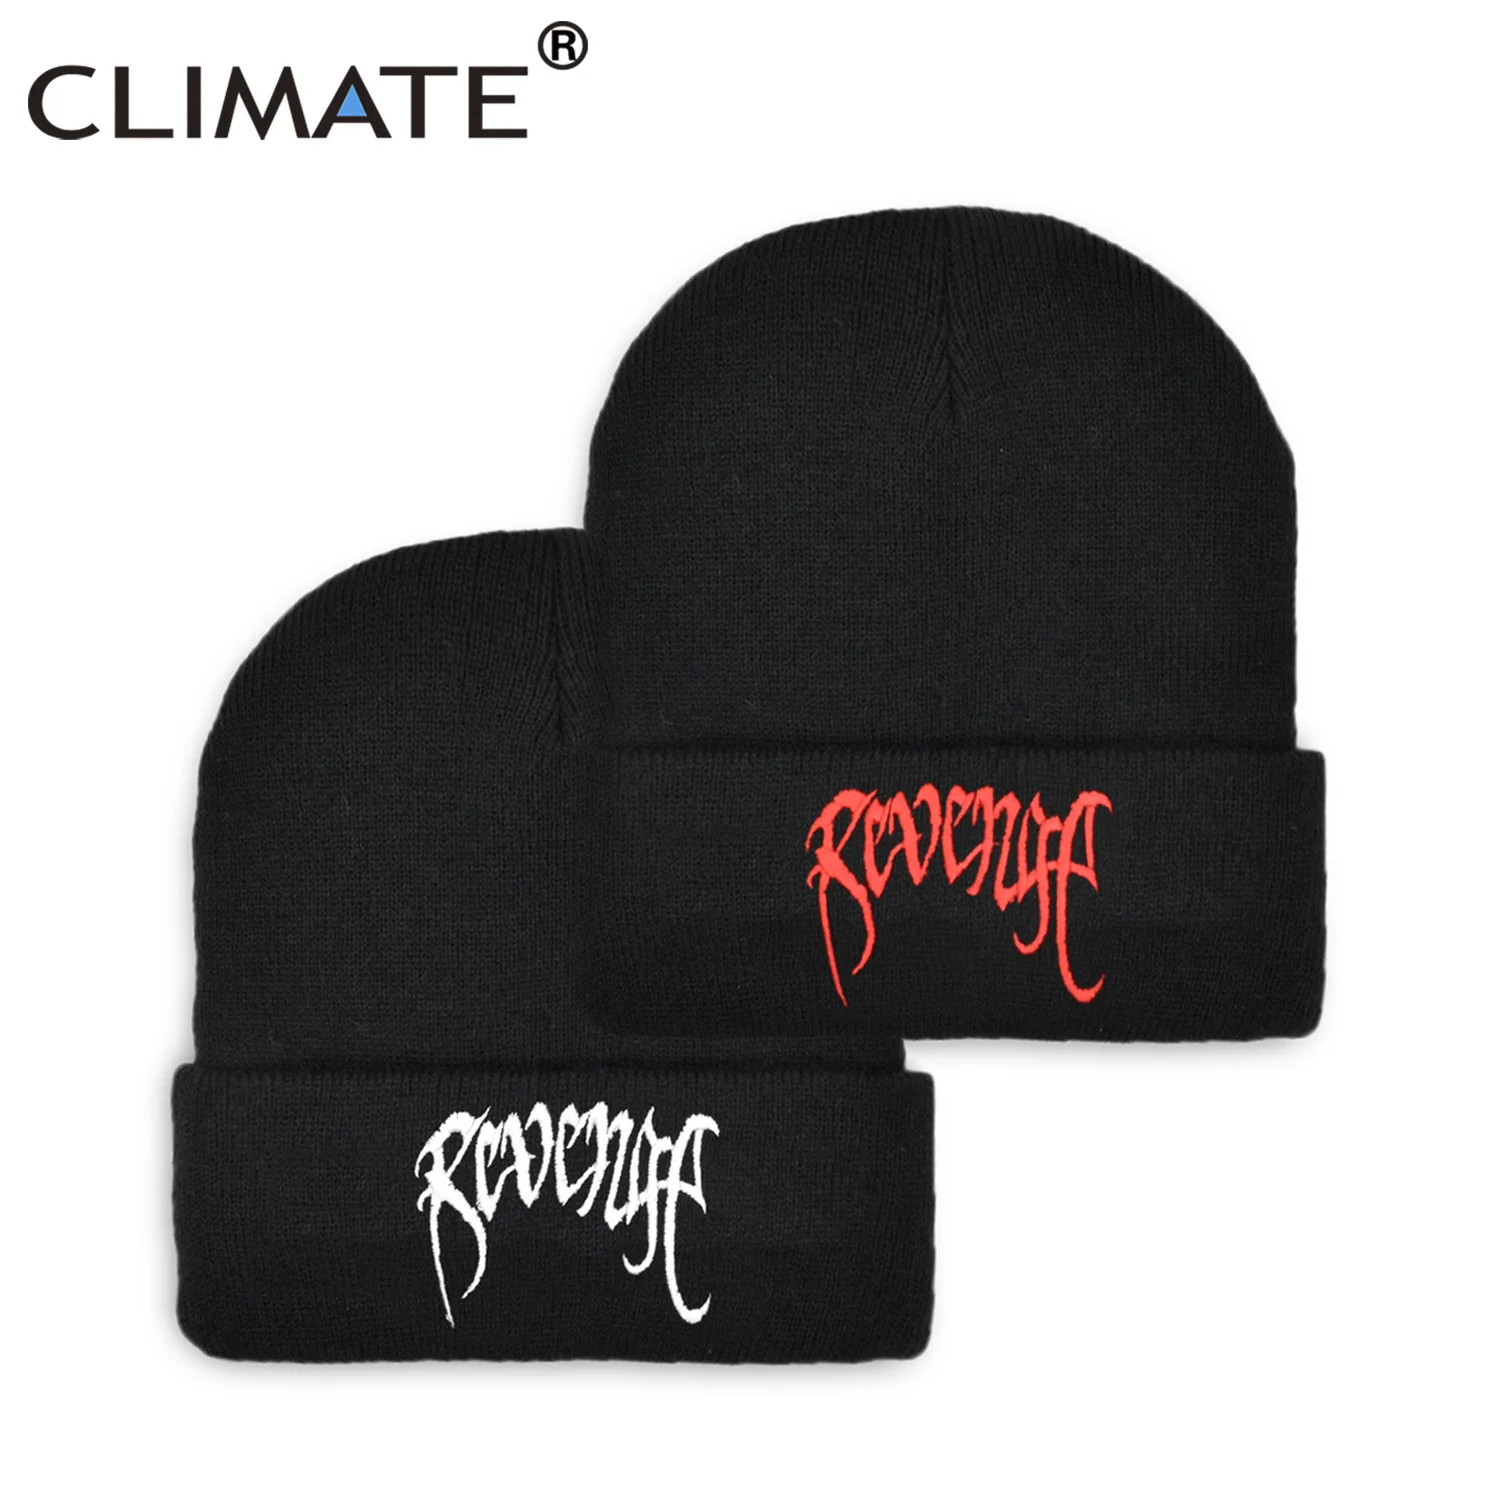 

CLIMATE Revene Beanie New Cool Men's Winter at Black Winter Beanies at Cap Warm Knit ip op Beanie at Caps for Men